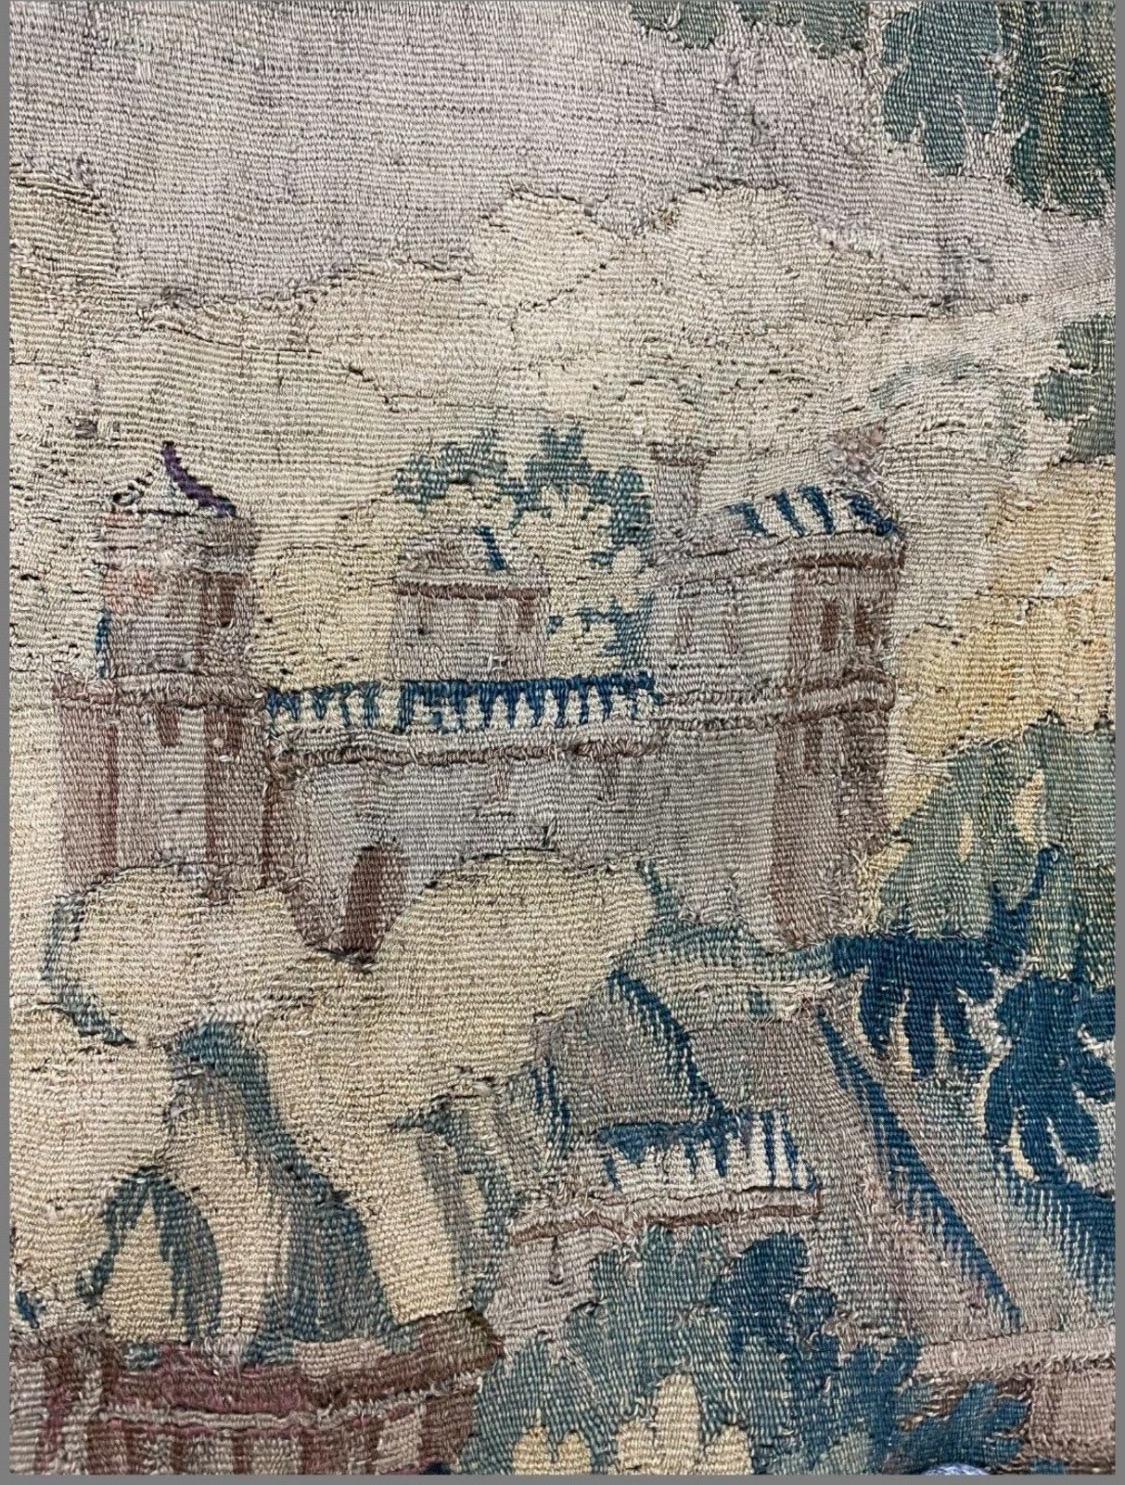 Dutch Early 17th Century Flemish Verdure Landscape Tapestry with Birds For Sale